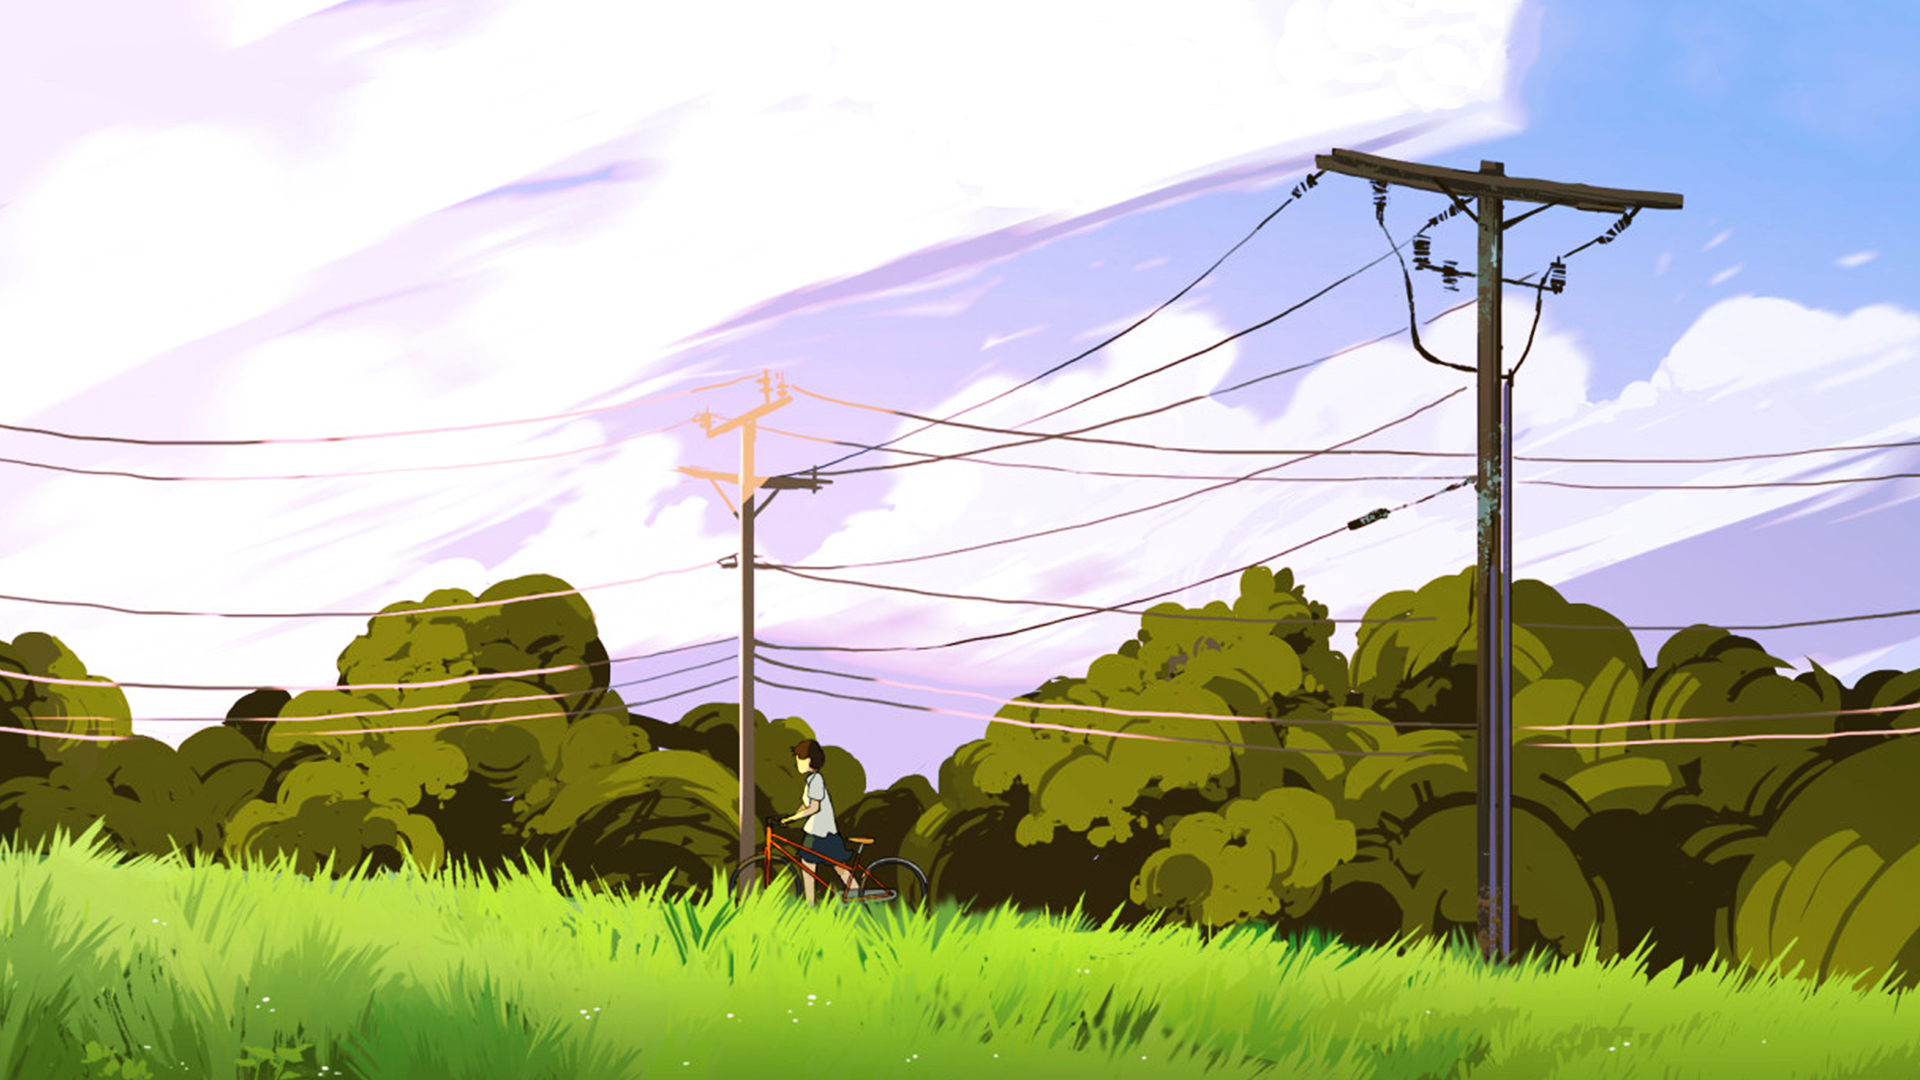 Anime 1920x1080 nature grass landscape anime Anime screenshot clouds power lines walking bicycle green sky short sleeves sunlight anime girls